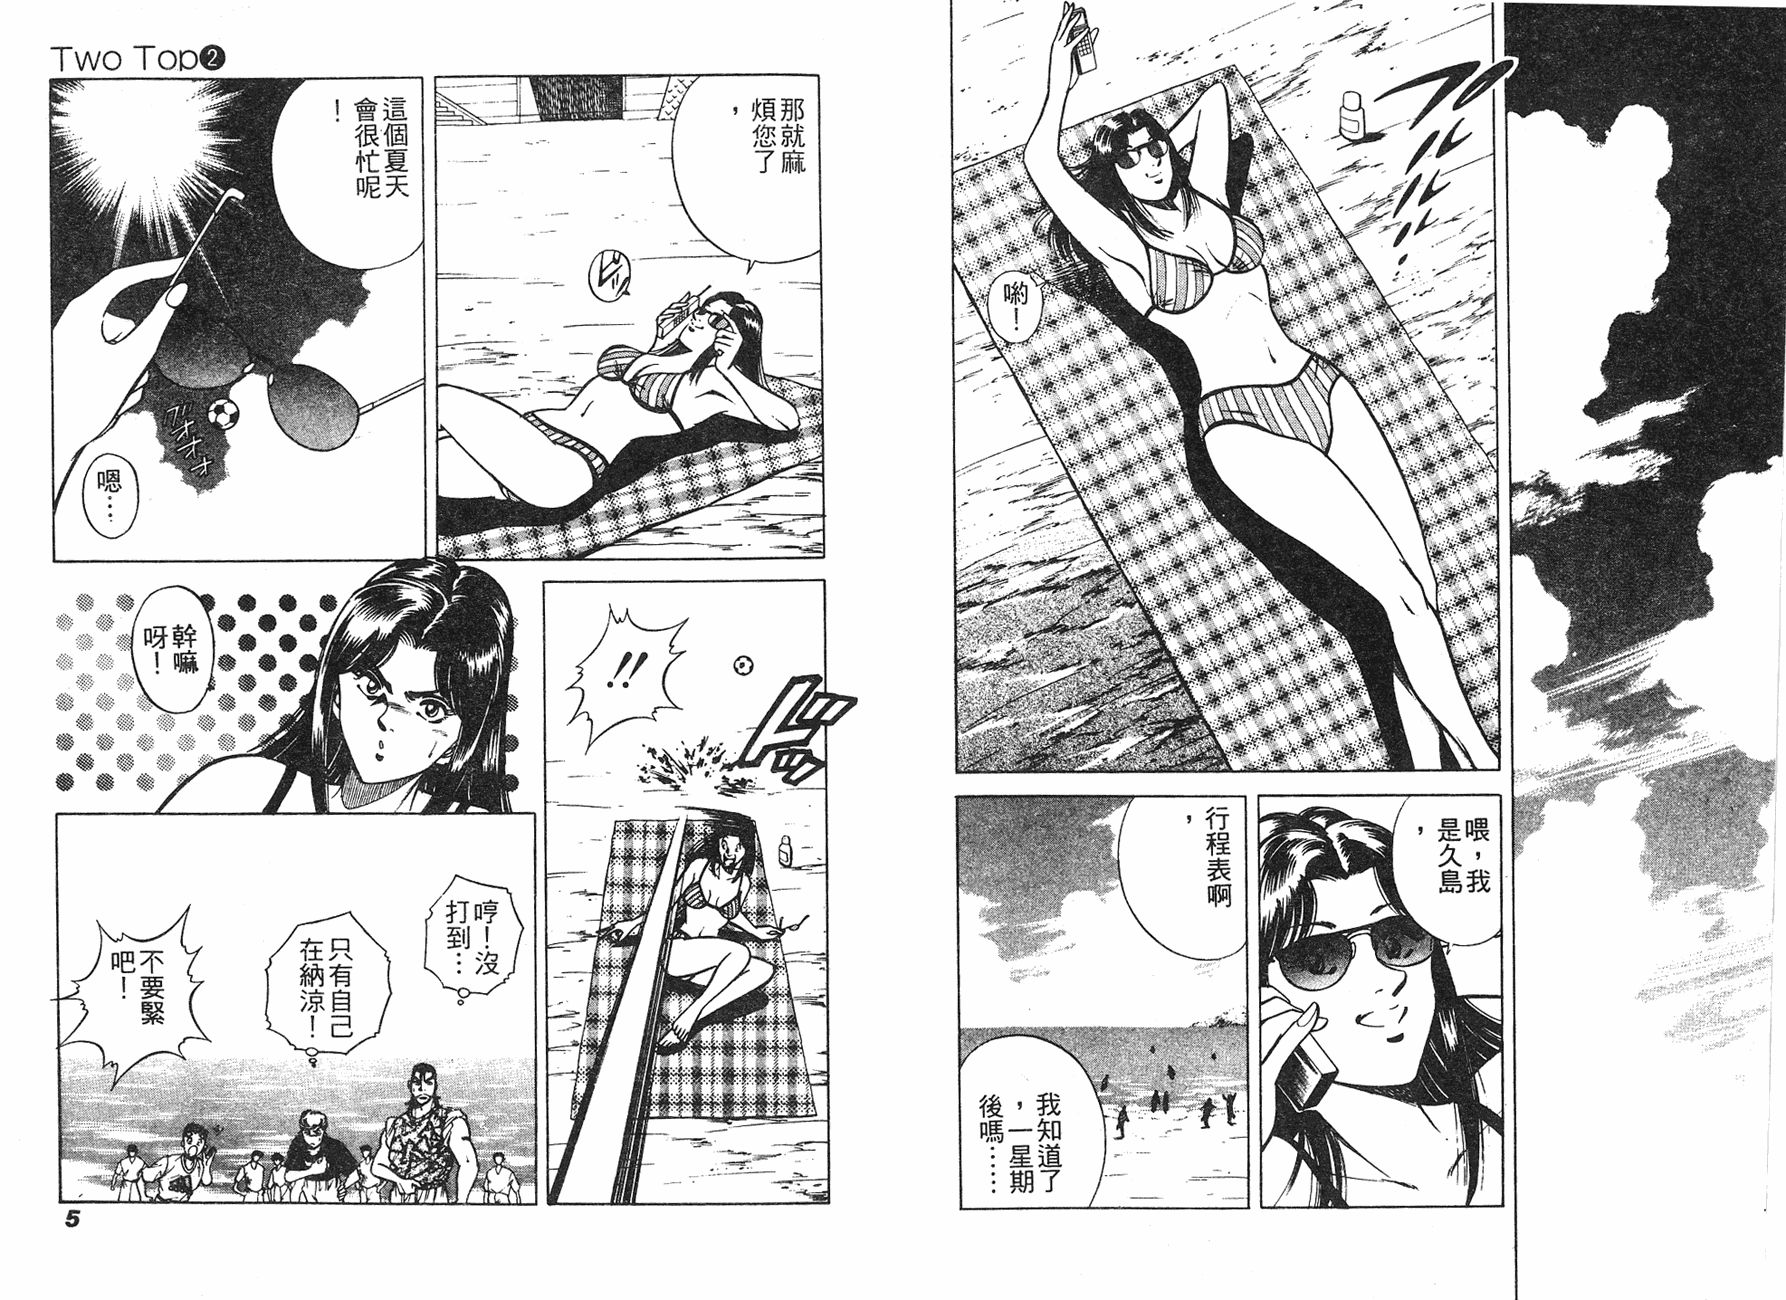 Two Top - 第02卷(1/3) - 4